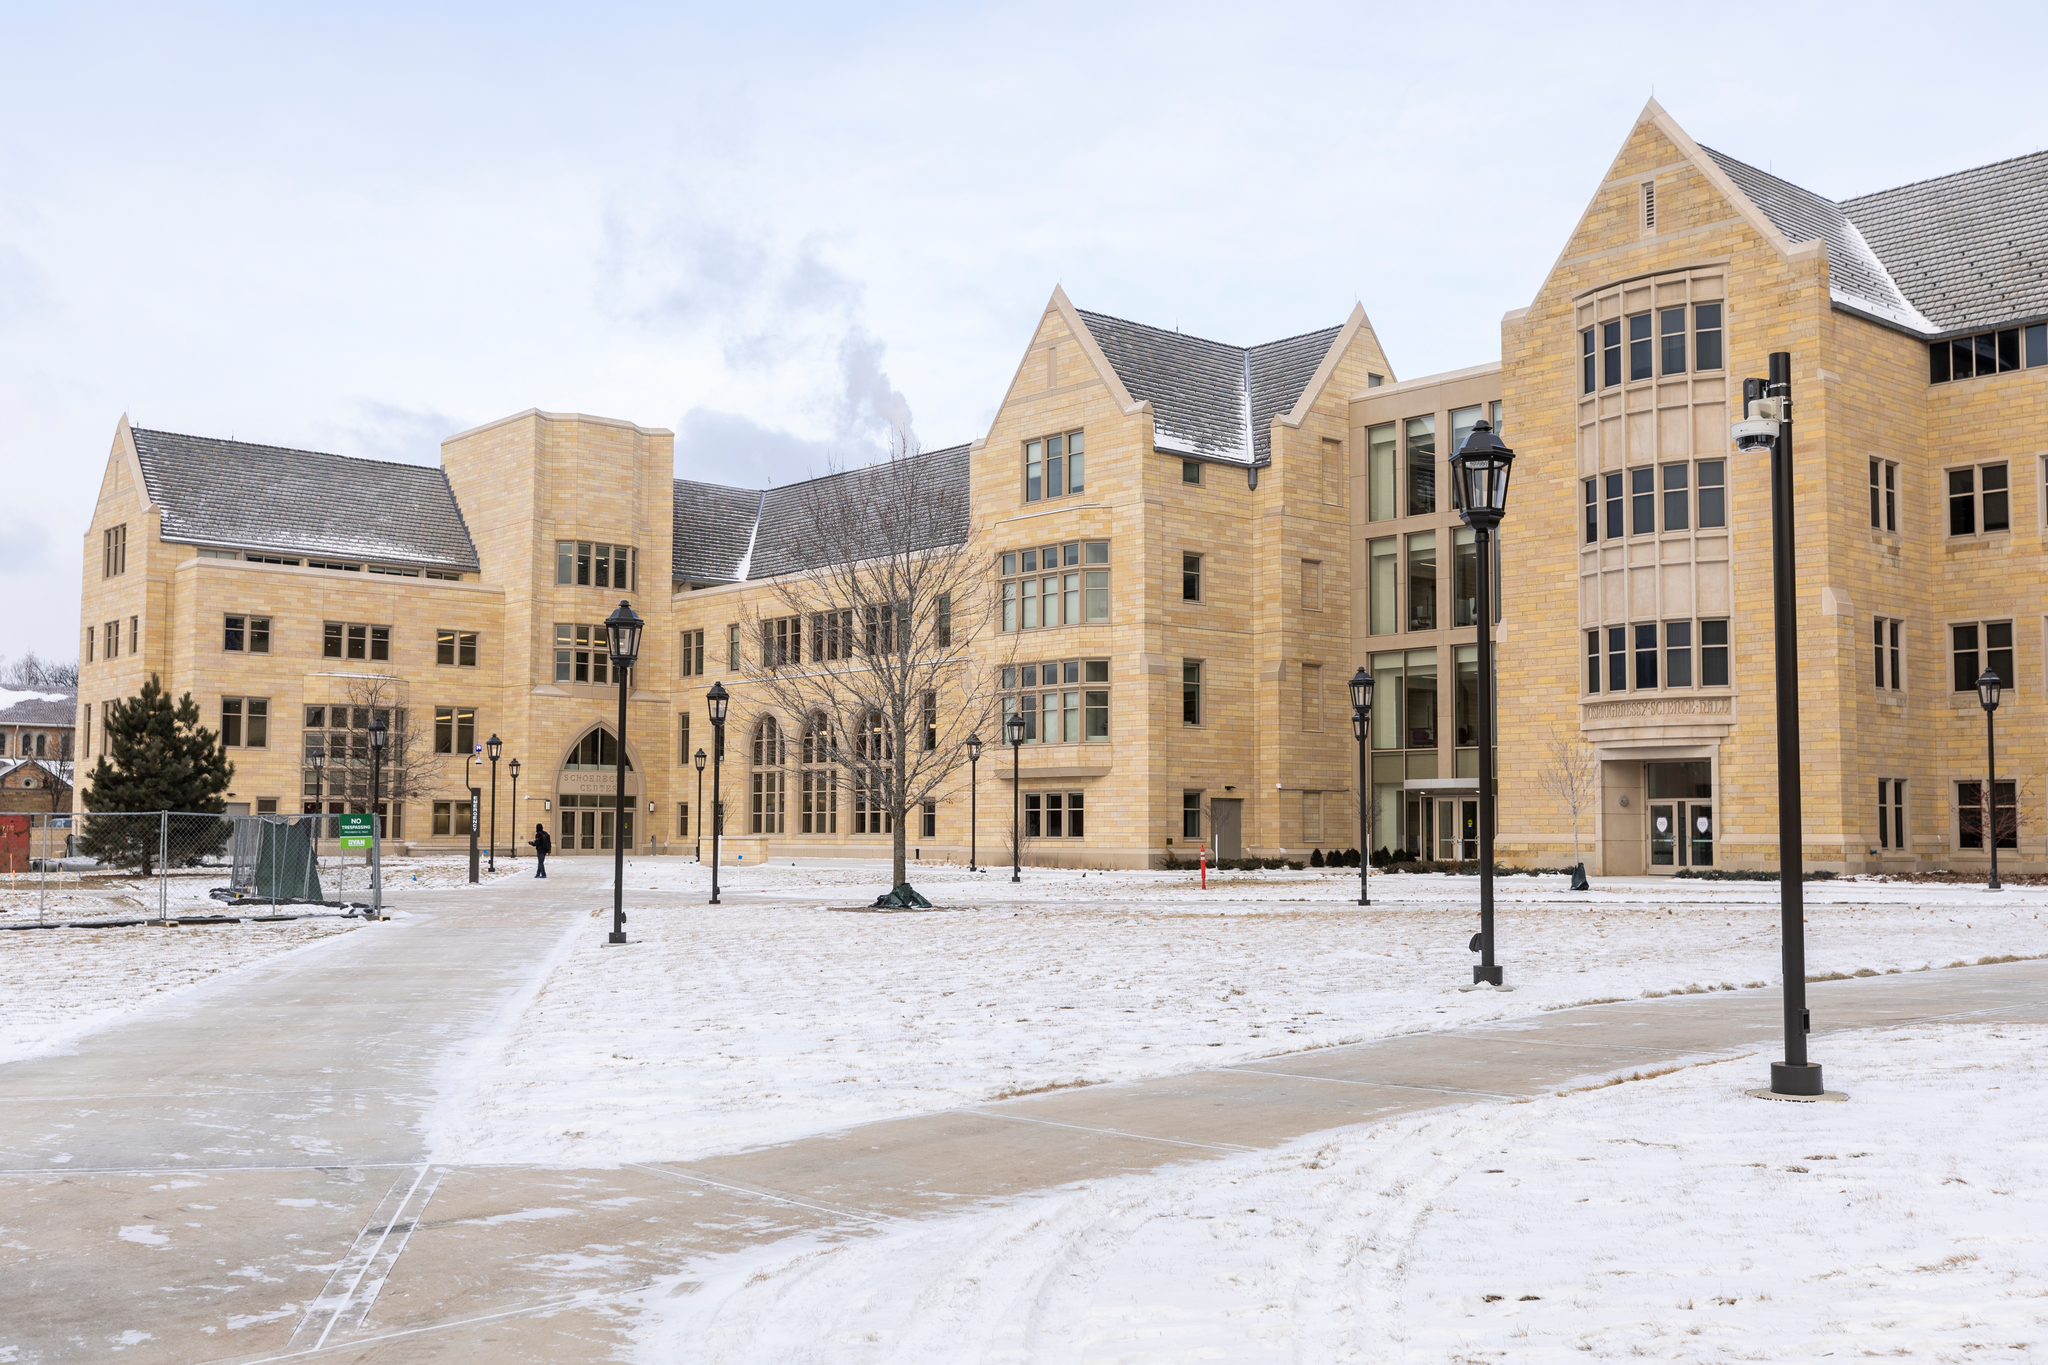 Campus scene of the new Schoenecker Center on a snowy day